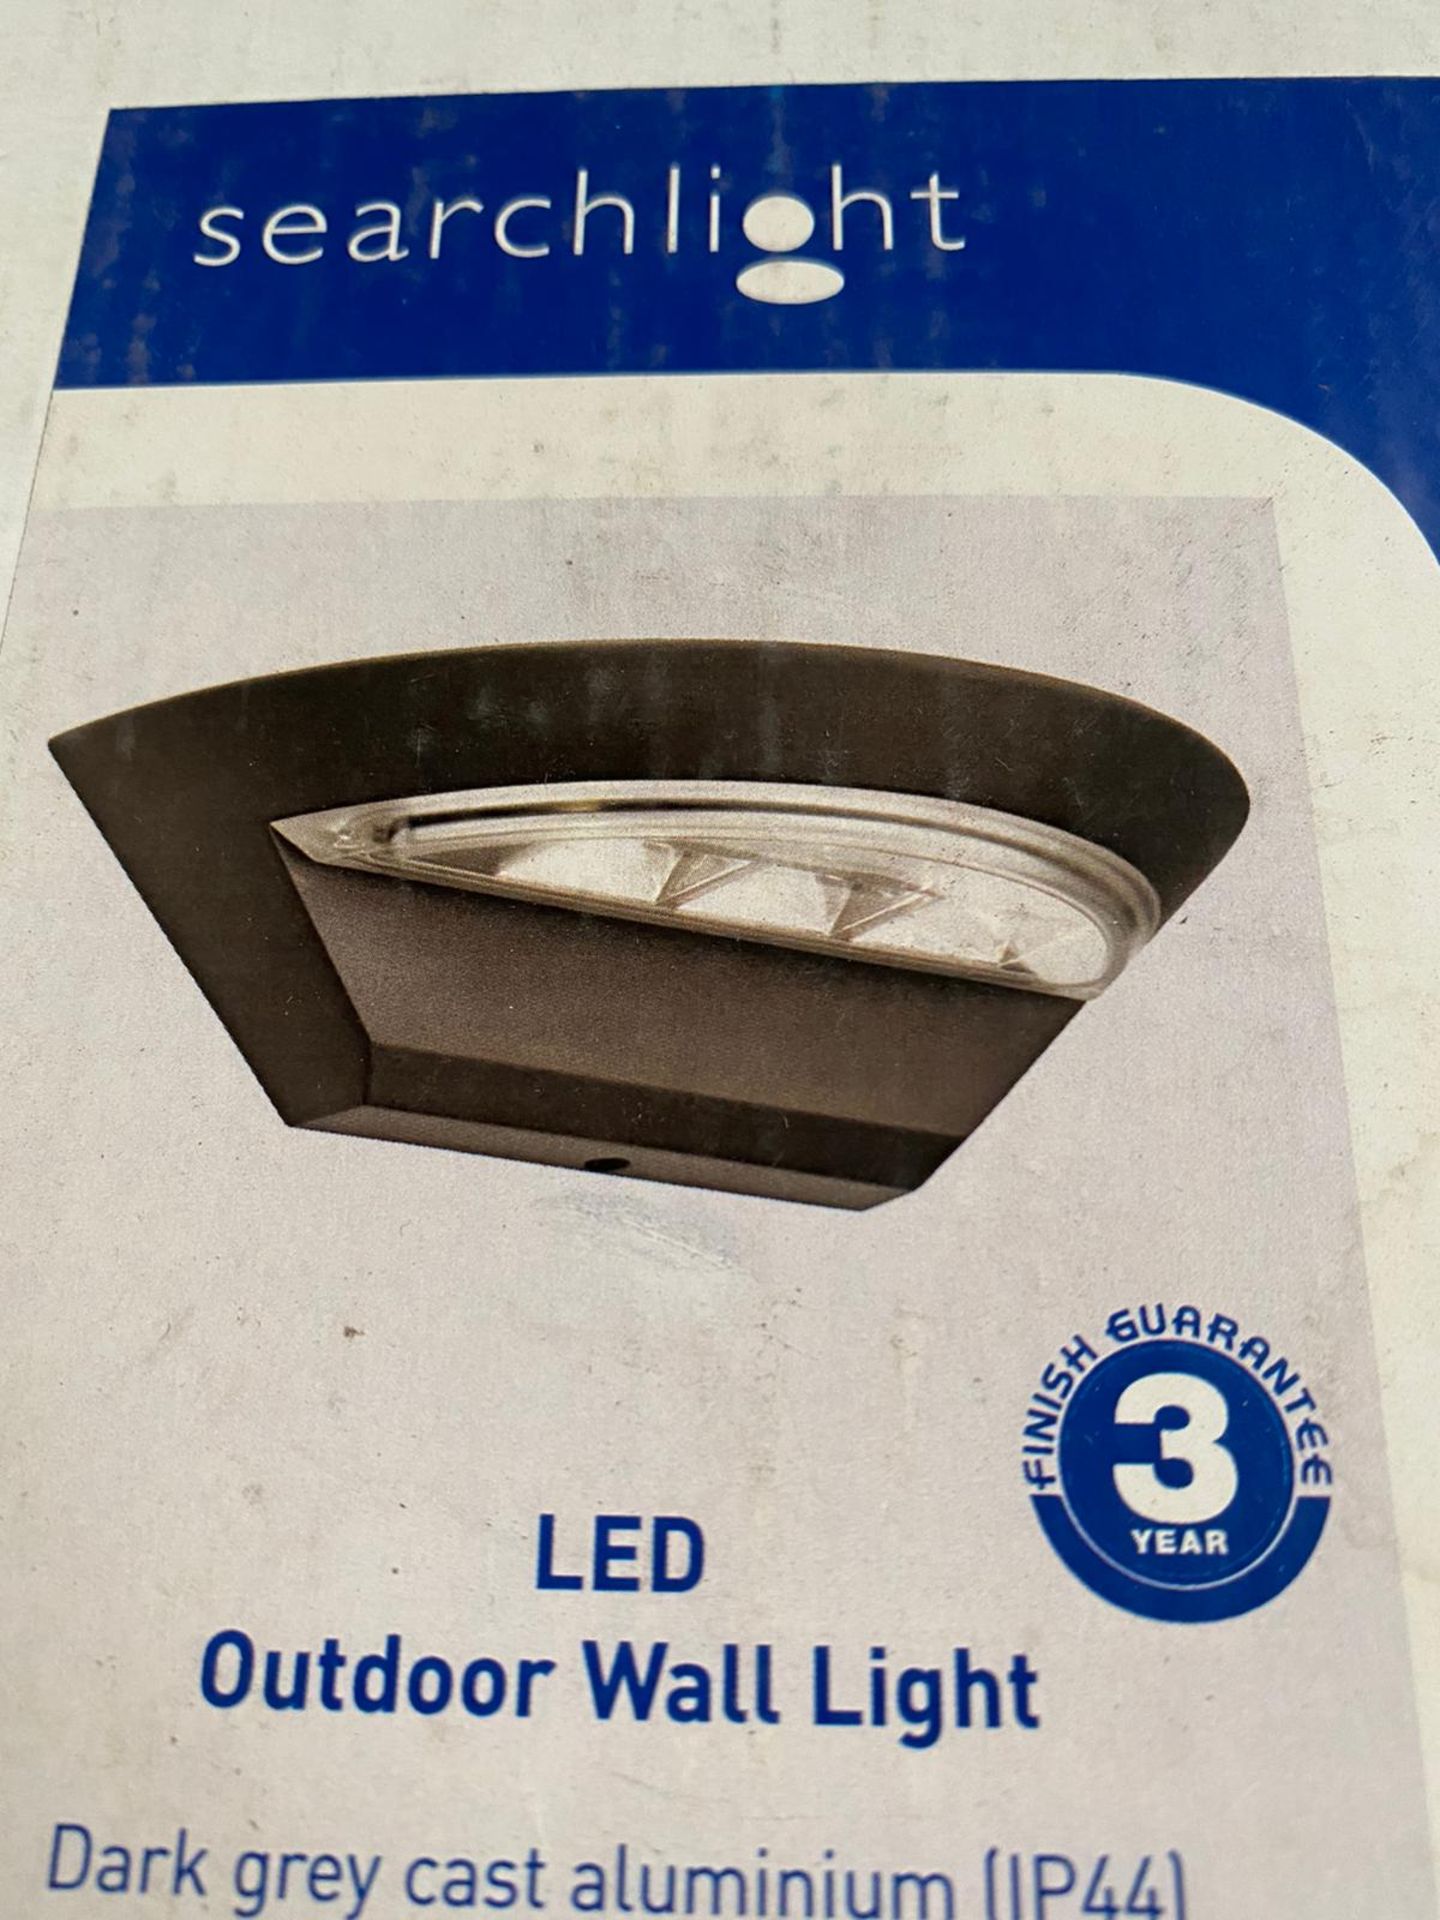 2 x Searchlight LED Outdoor Wall Light - Ref: 5122GY - New and Boxed - RRP: £70 (each) - Image 4 of 4